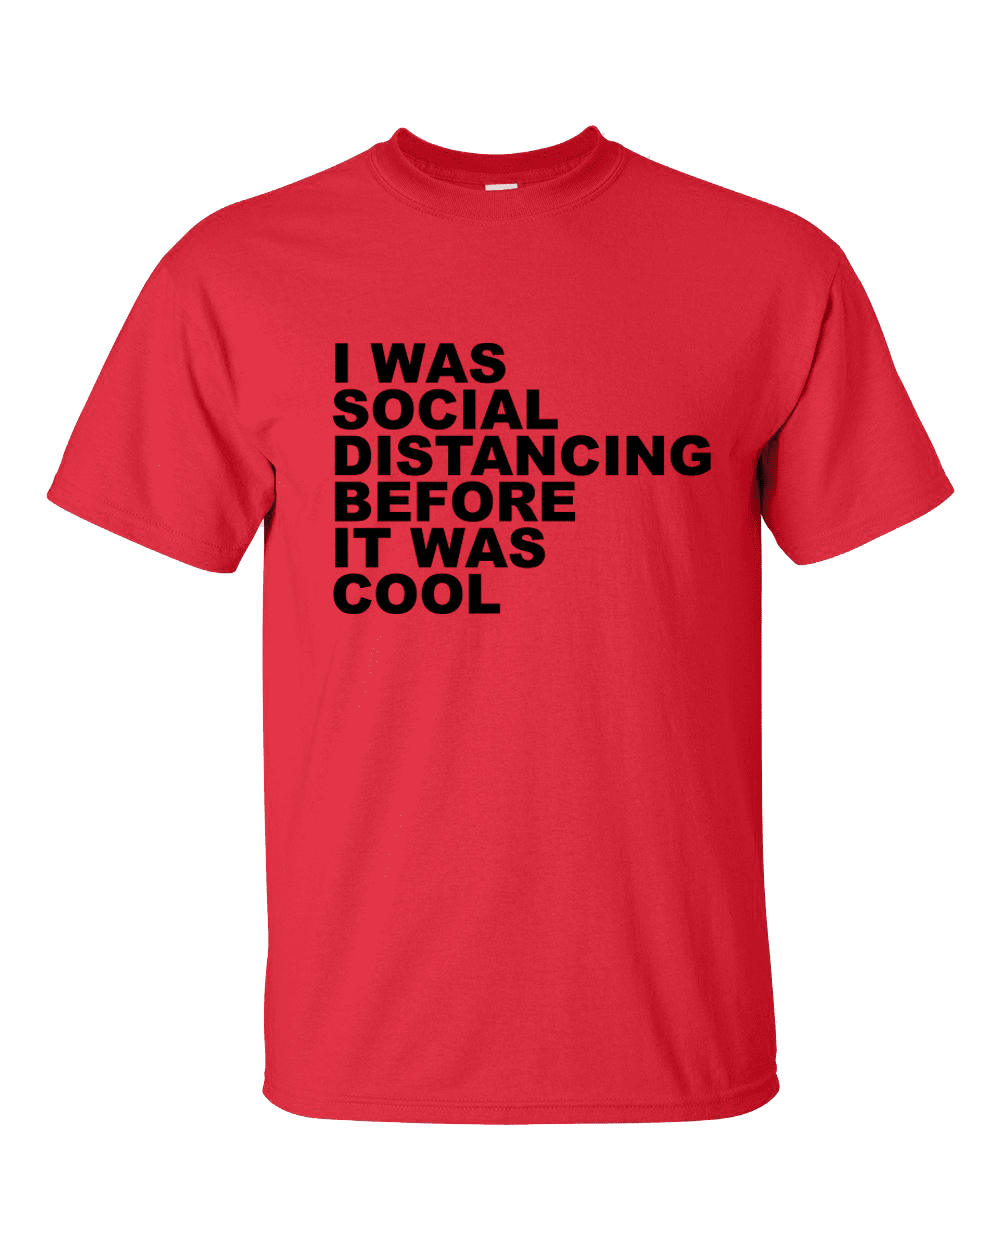 Covid Social Distancing Shirt Gift Essential Worker Top Selling Items Funny Shirt If You Can Read This Unisex Premium Tee